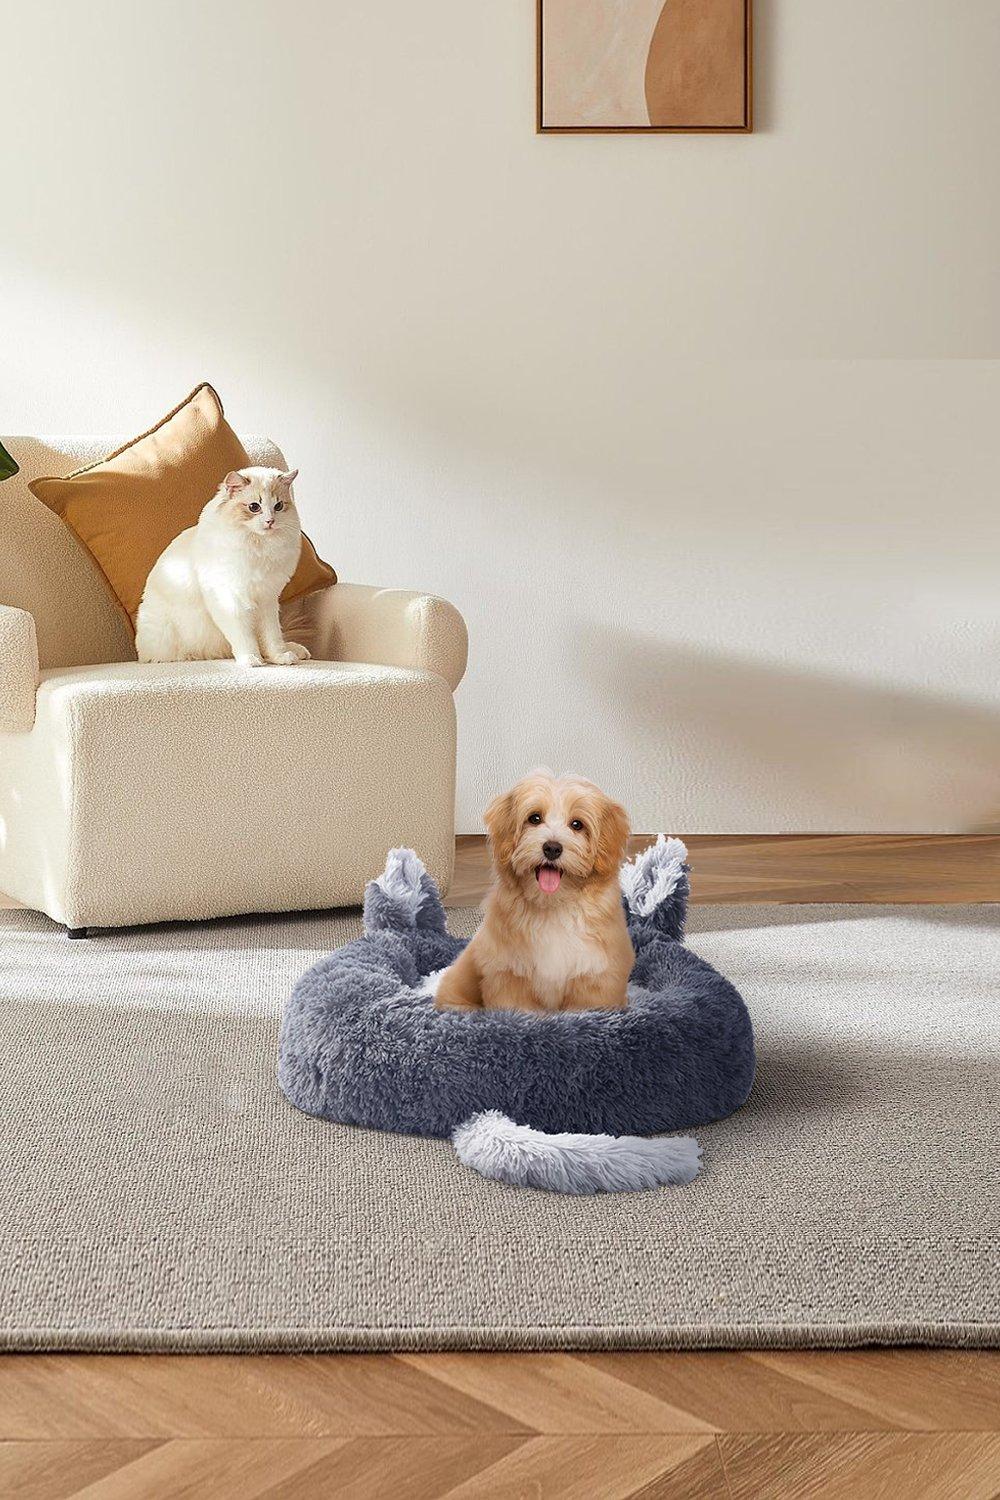 Round Plush Pet Dog Cat Calming Bed with Cute Ears 50x50cm